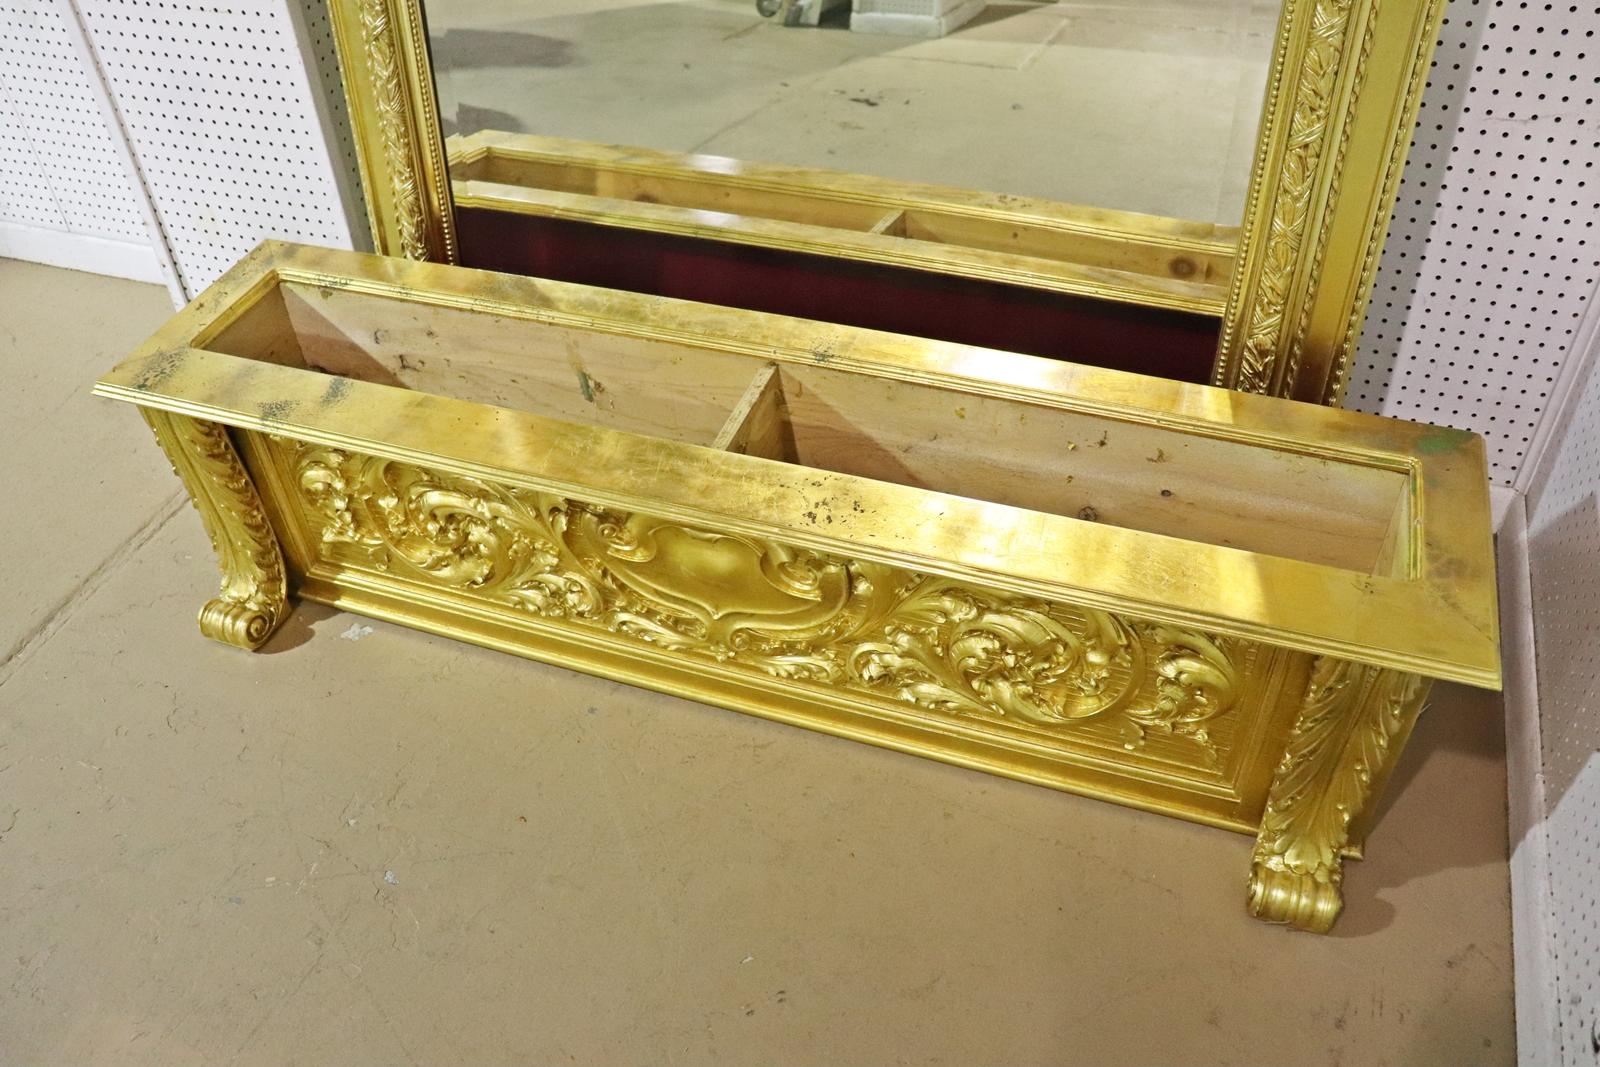 Late 19th Century Monumental Gilded French Louis XV Trumeau Mirror with Planter Base Circa 1890 For Sale